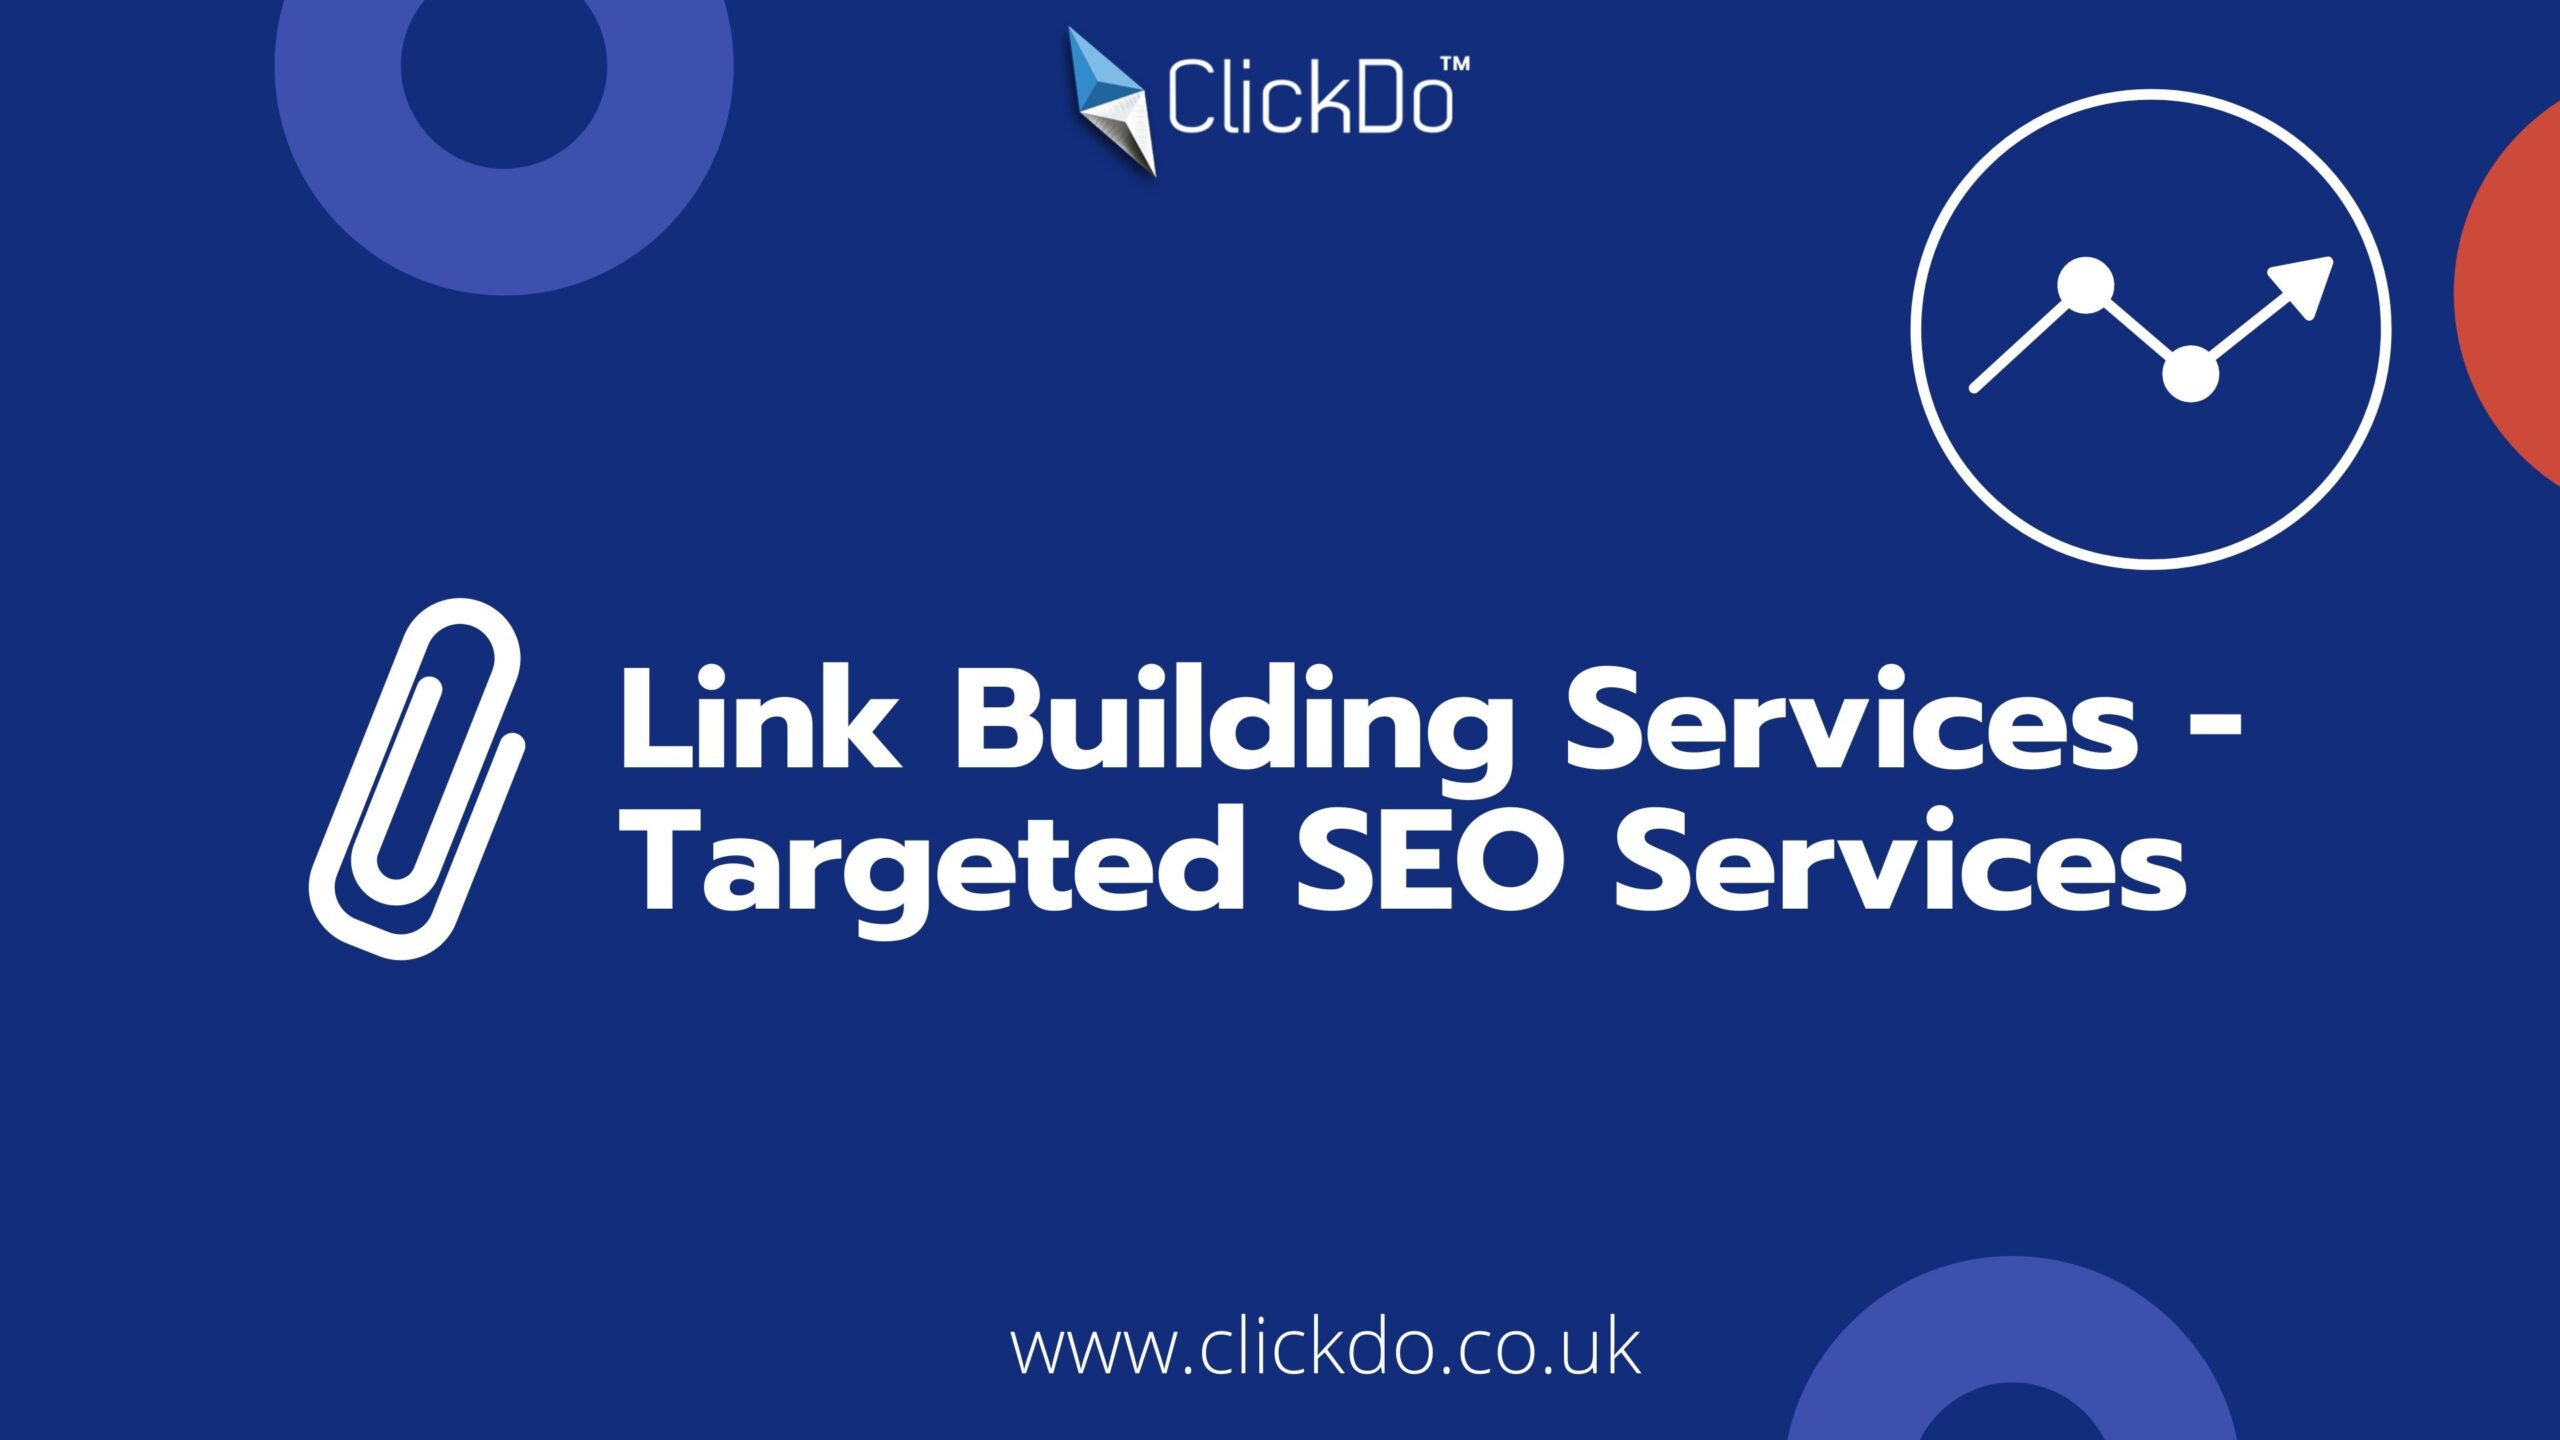 Link Building Services - Targeted SEO Services